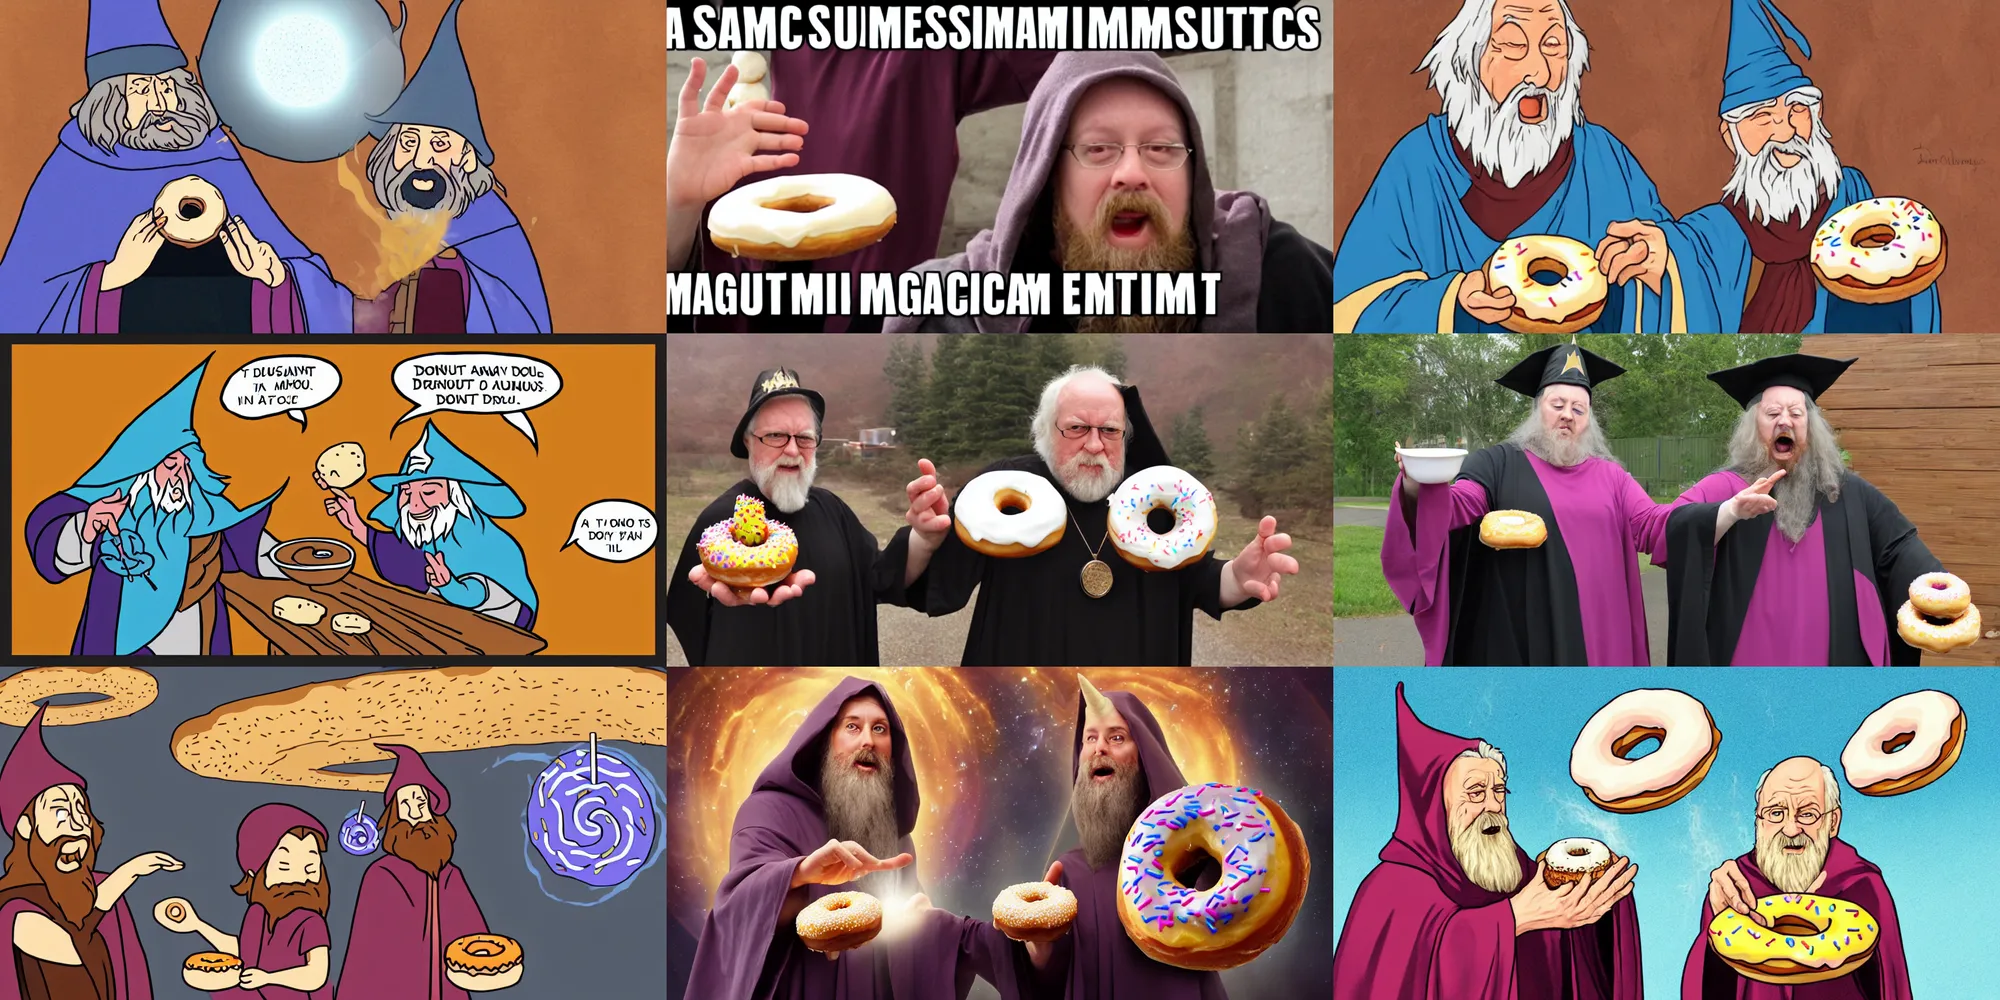 Prompt: a wizard summons a donut with magic